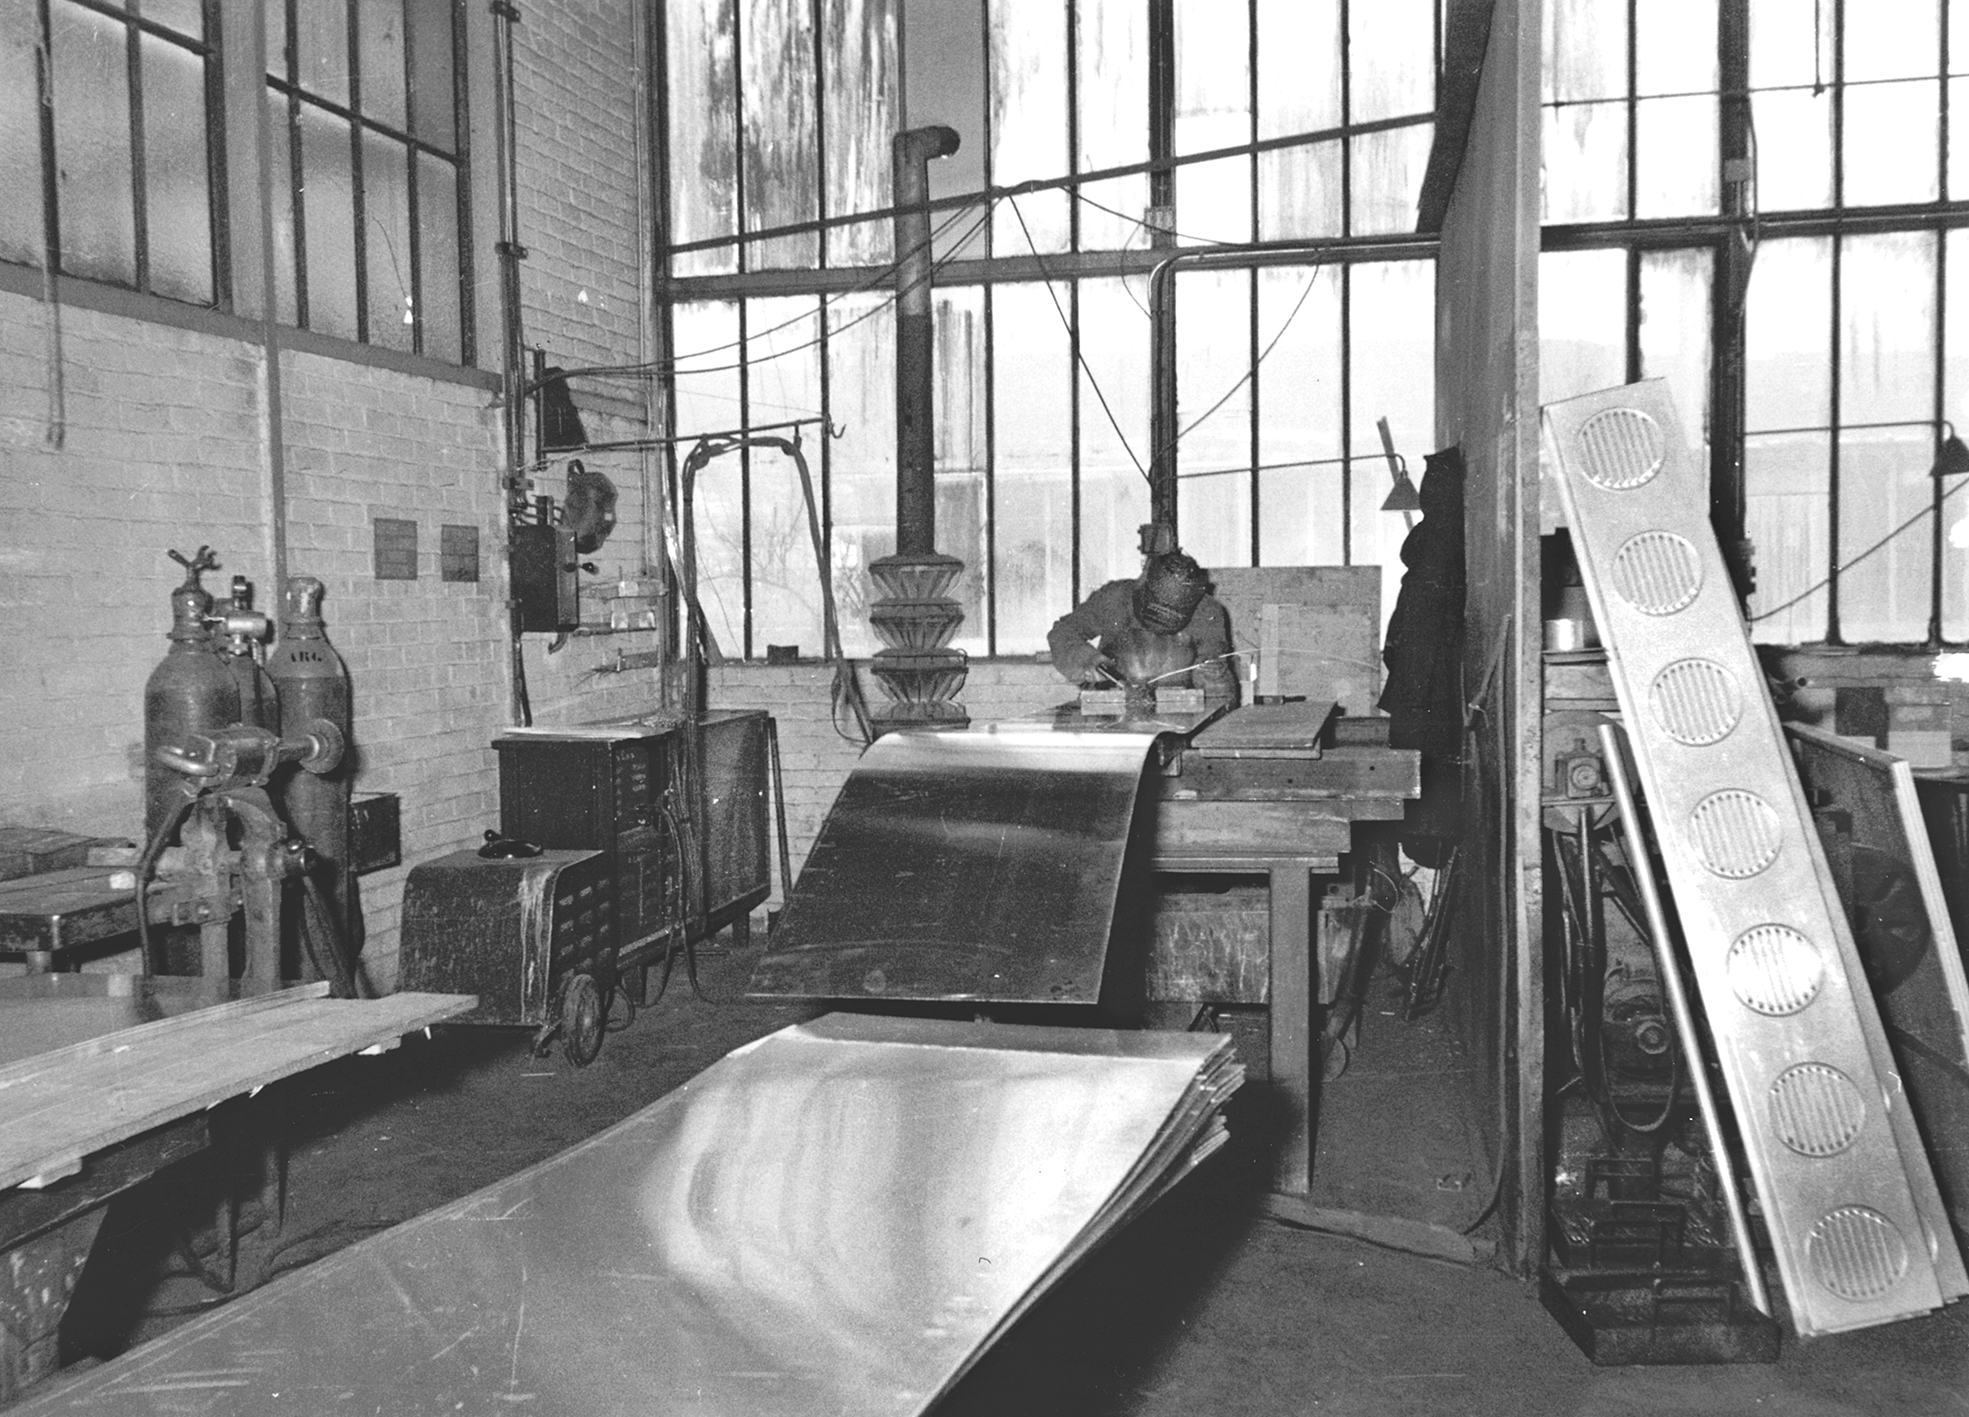 Ateliers Jean Prouvé in Maxéville. Fabrication of lighting ramps and of aeration systems for the Sécurité Sociale building in Le Mans, 1953–1954.